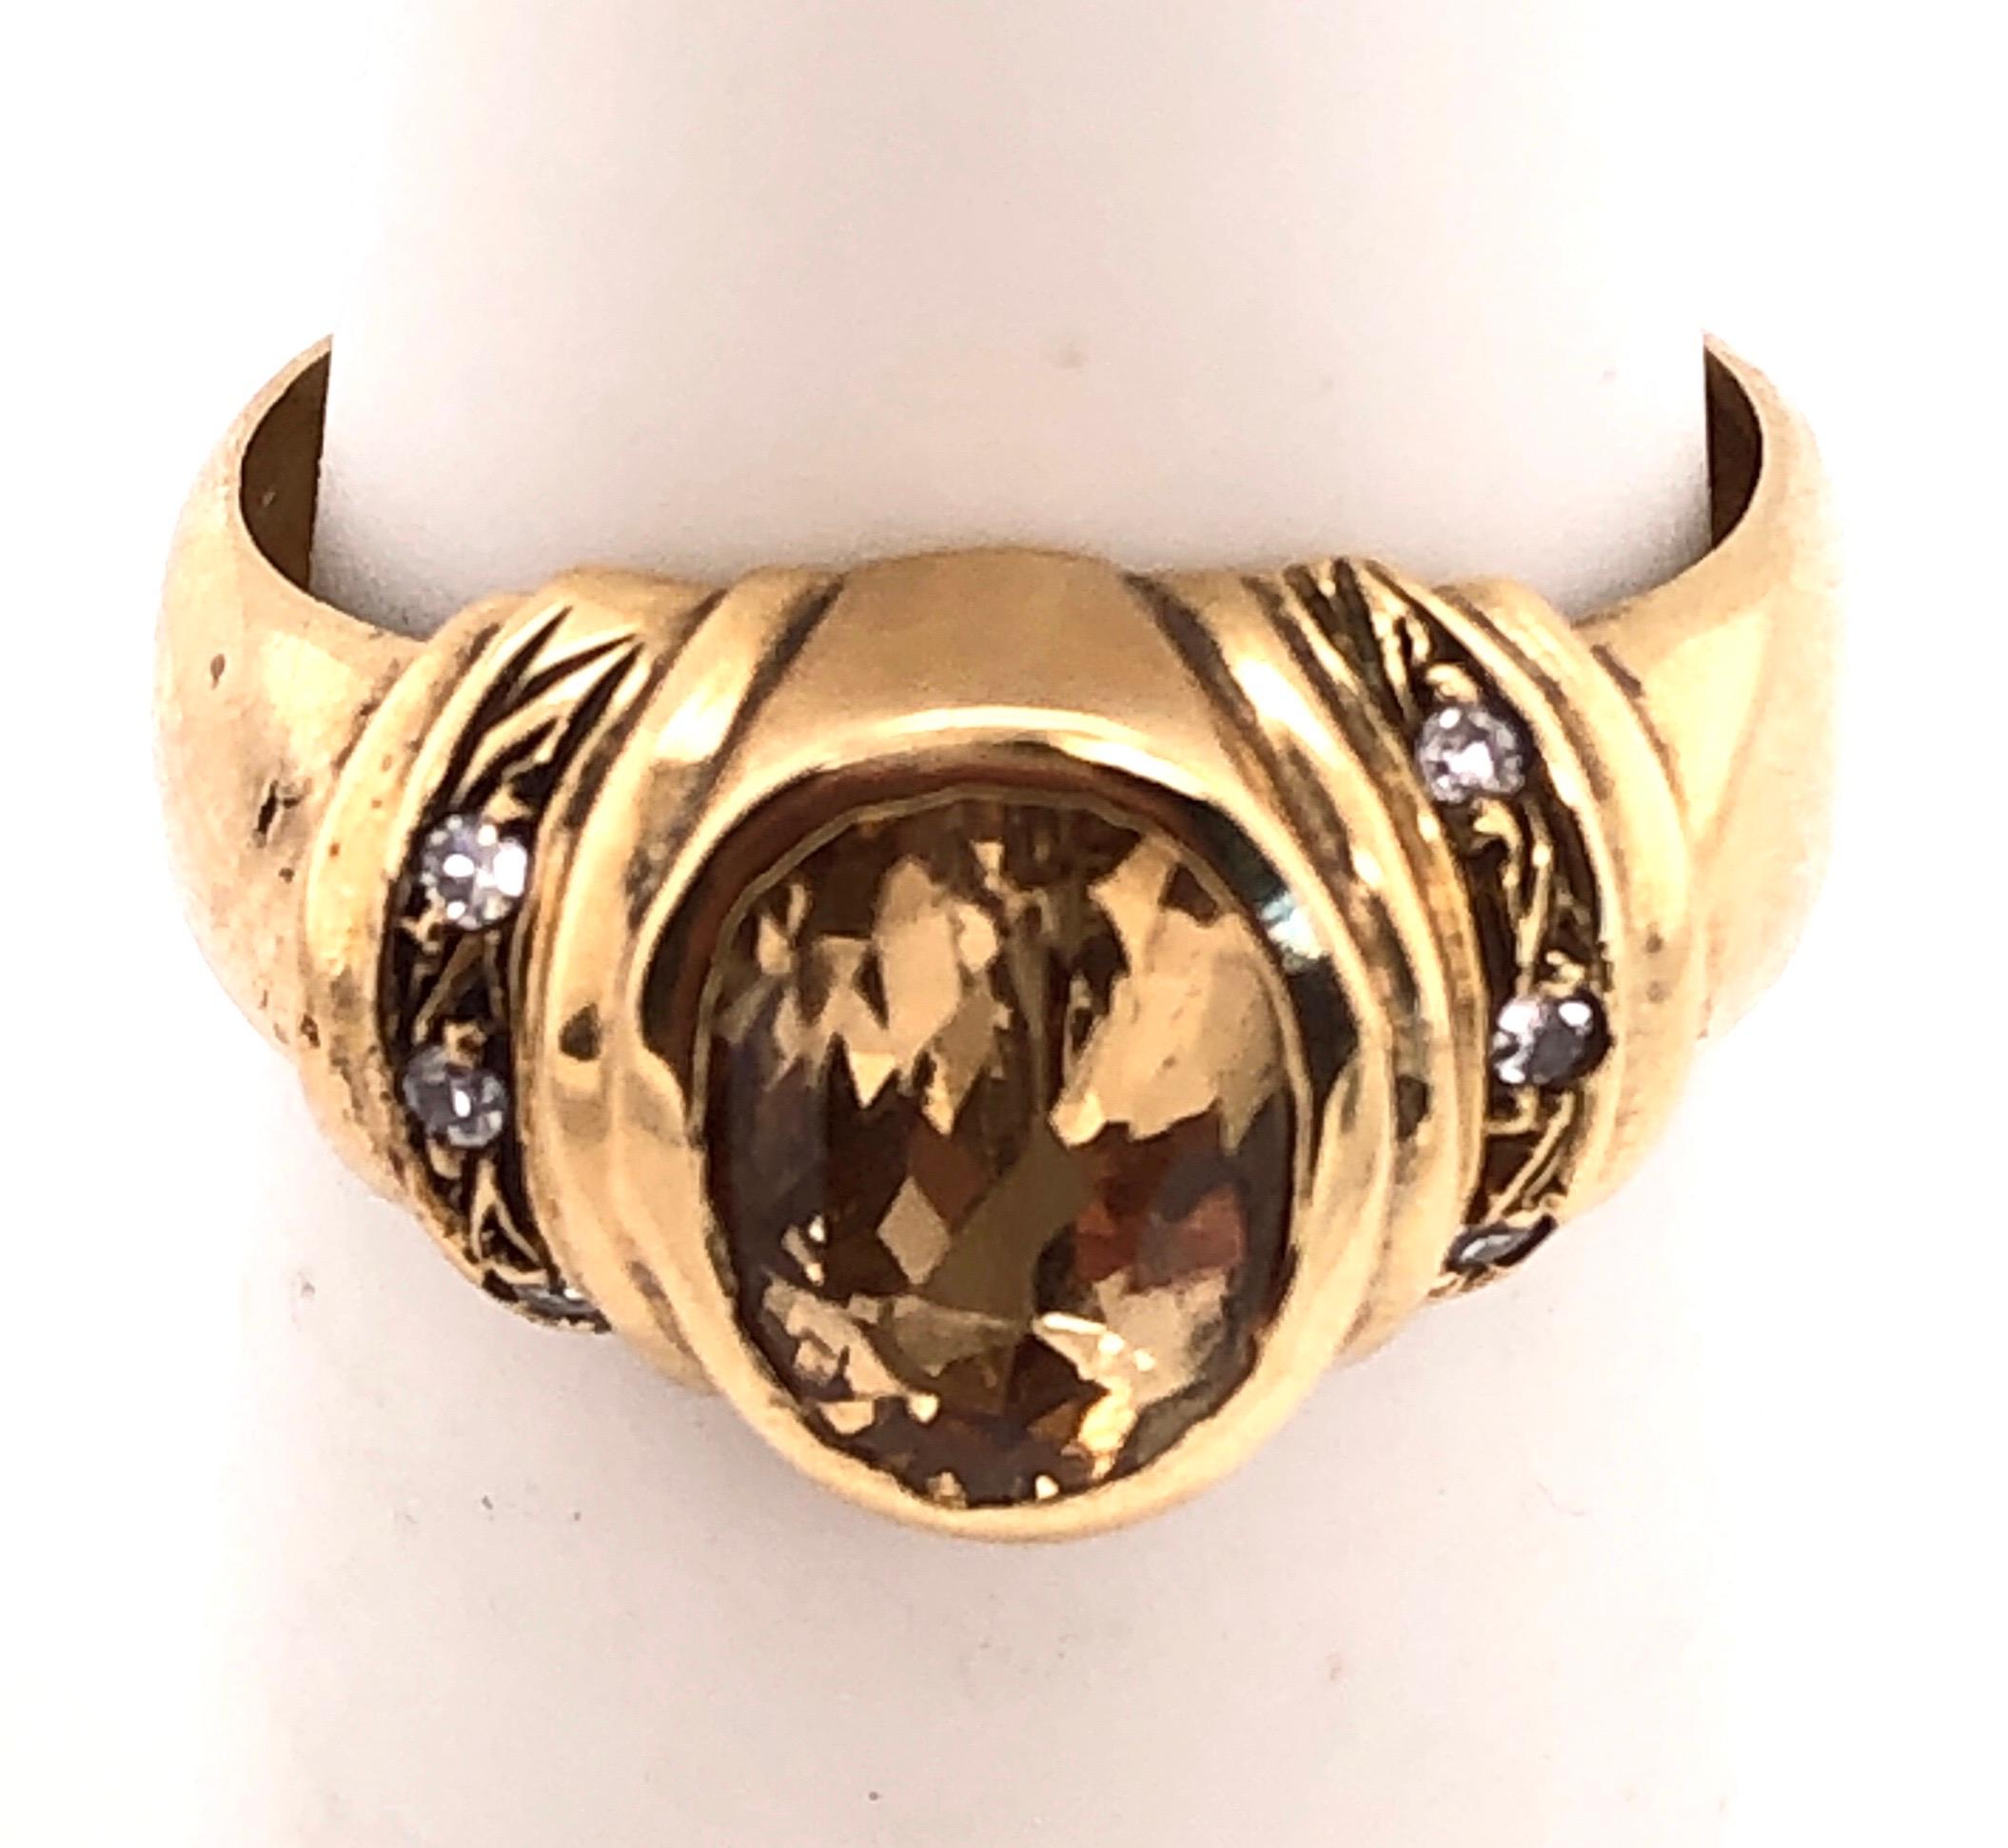 14 Karat Yellow Gold Contemporary Ring With Topaz Center Stone
Size 5.5 with 4.70 grams total weight